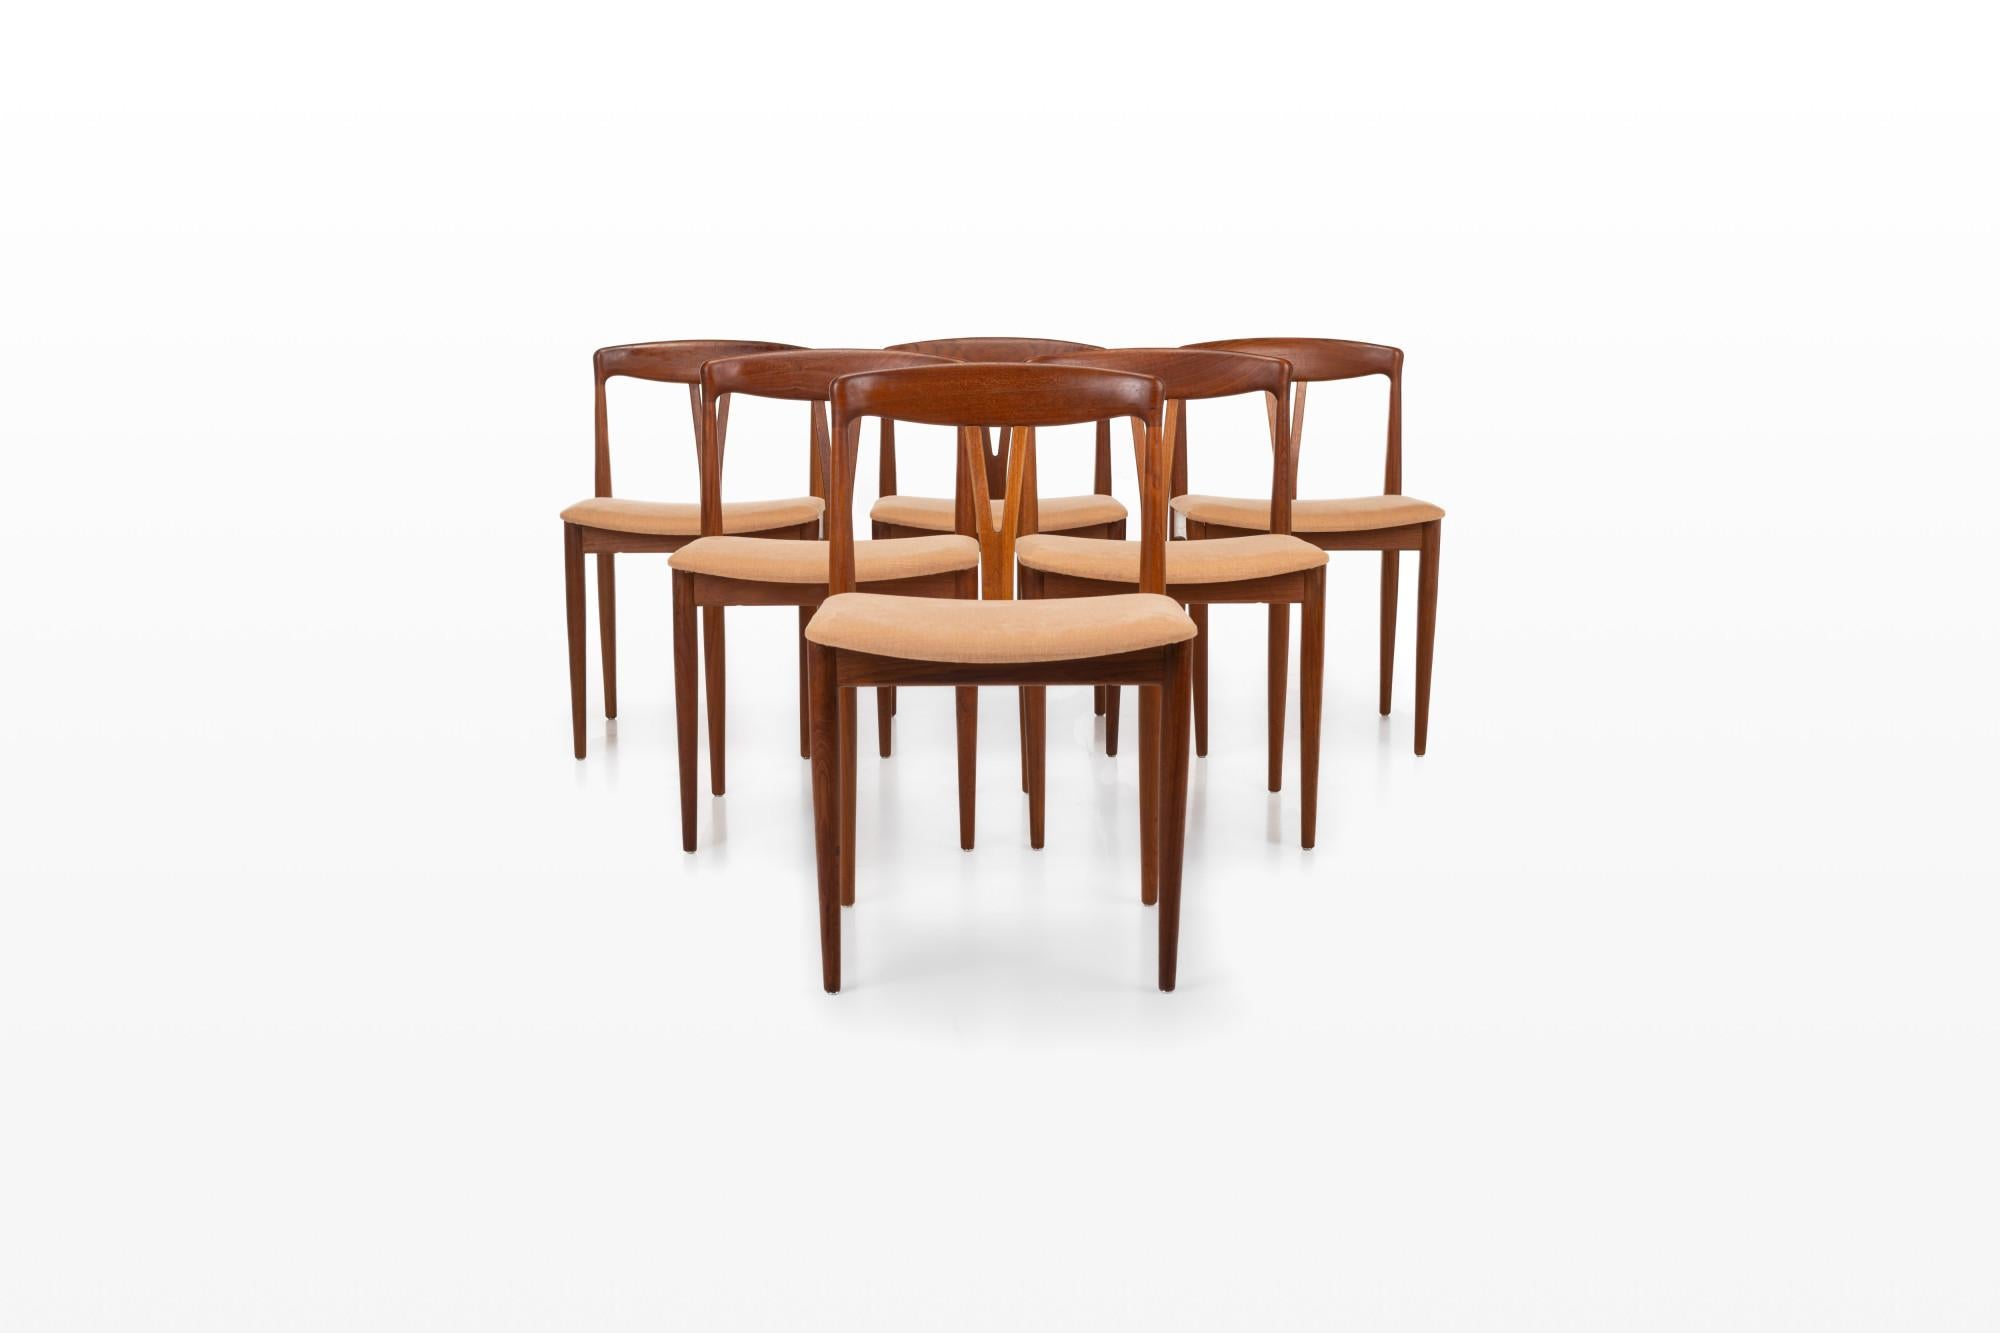 Set of six dining chairs produced in Denmark in the 1960s. The chairs have a teak frame and are reupholstered with a peach colored fabric.